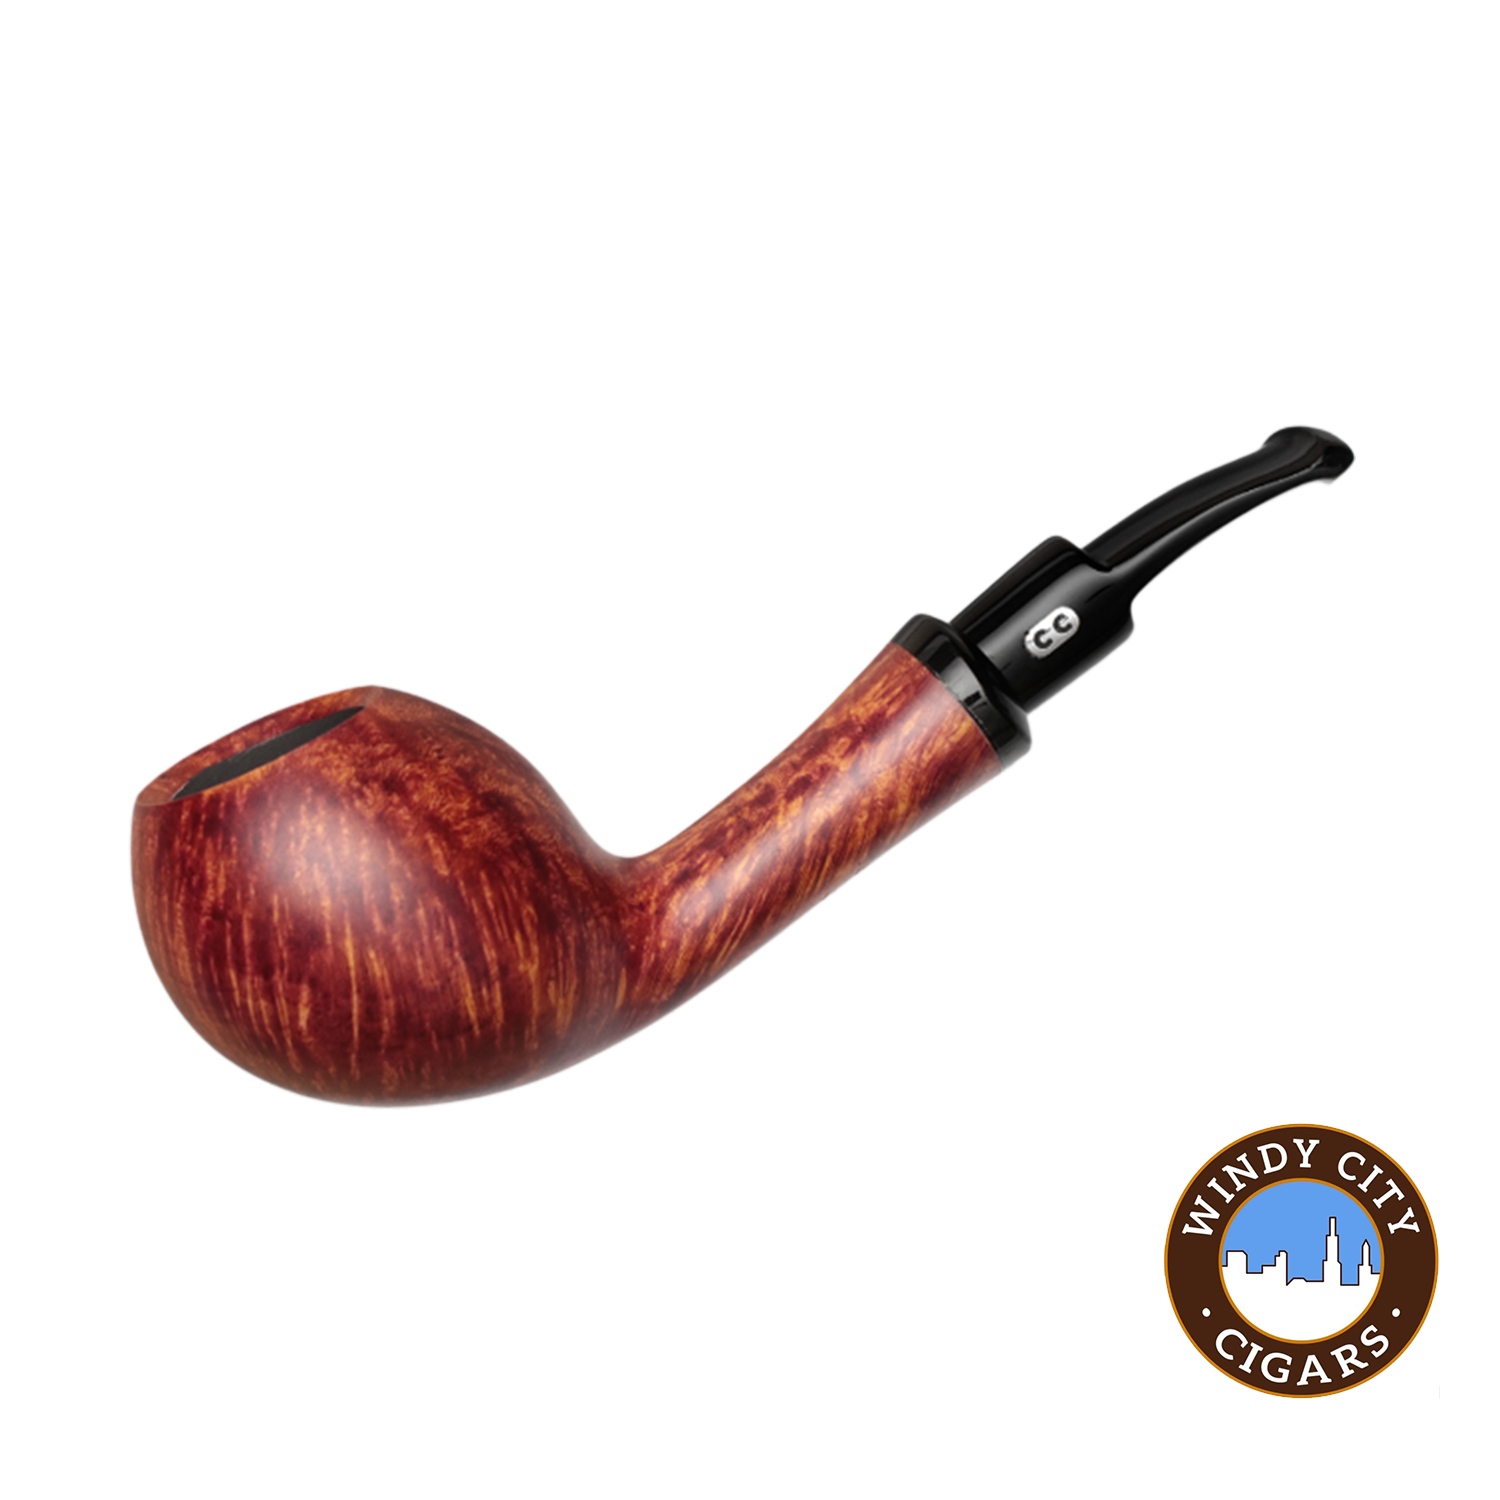 Chacom Anton Eltang Bordeaux Pipe